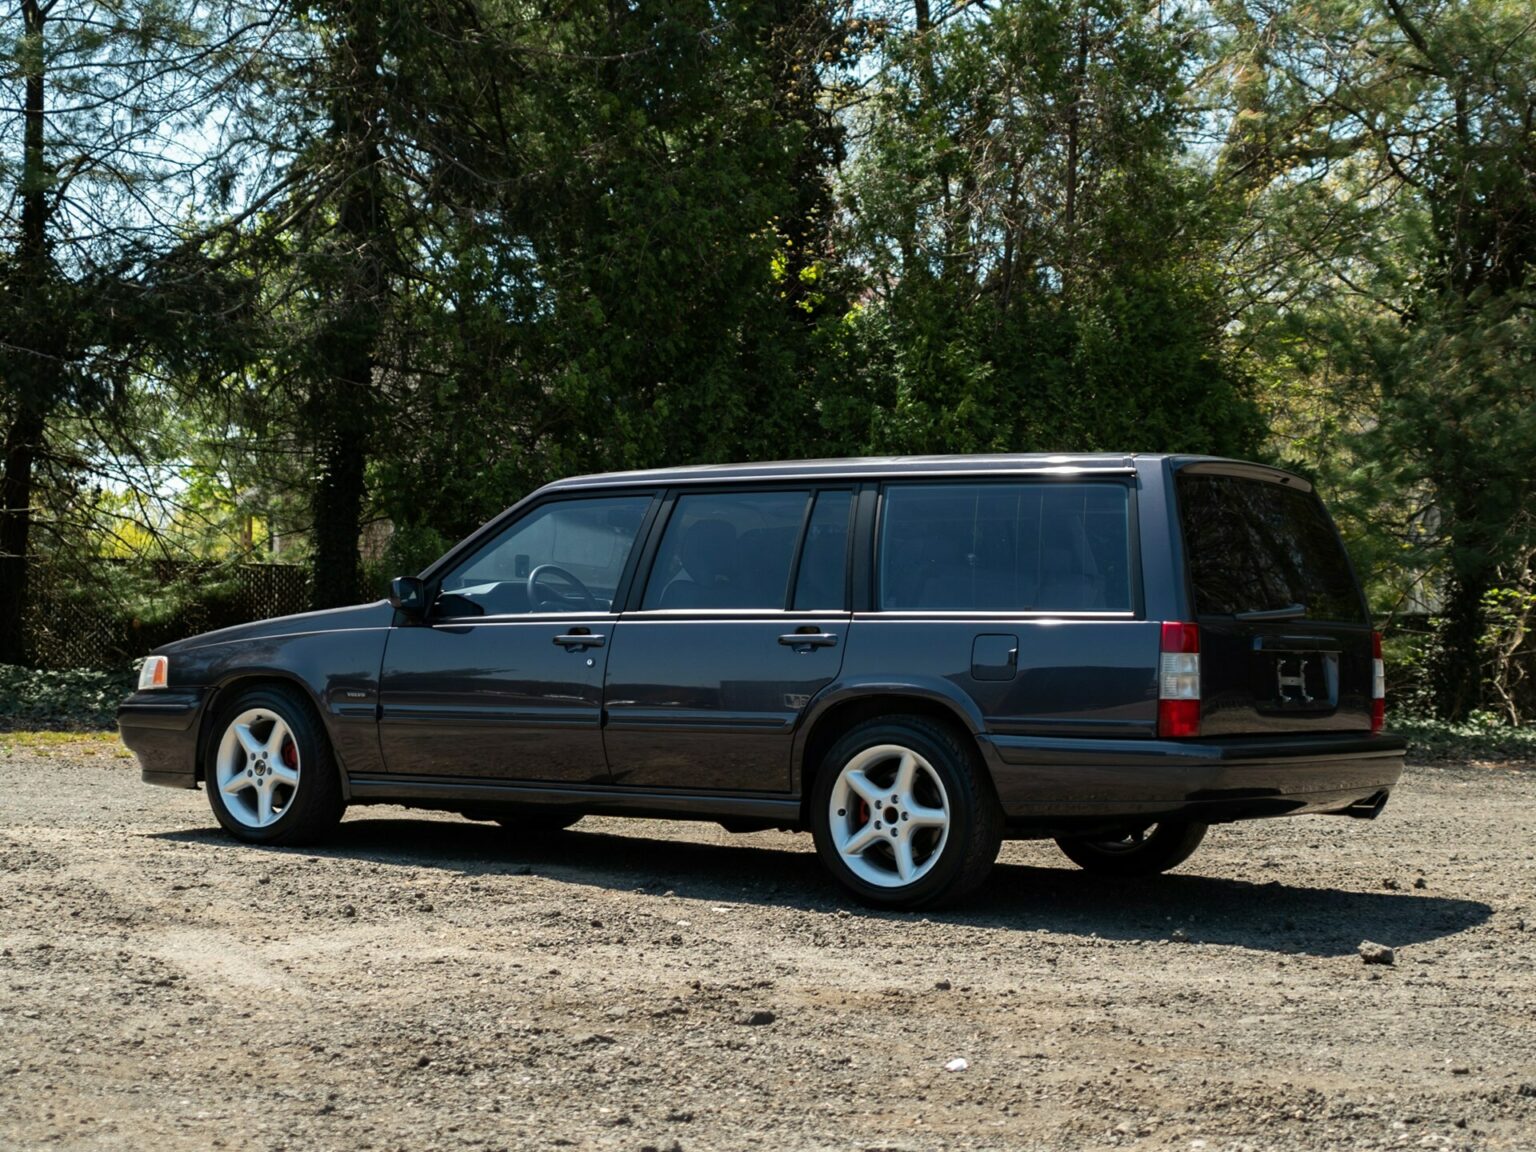 Paul Newmans Souped Up Volvo Wagon Is A Corvette V8 Powered Sleeper